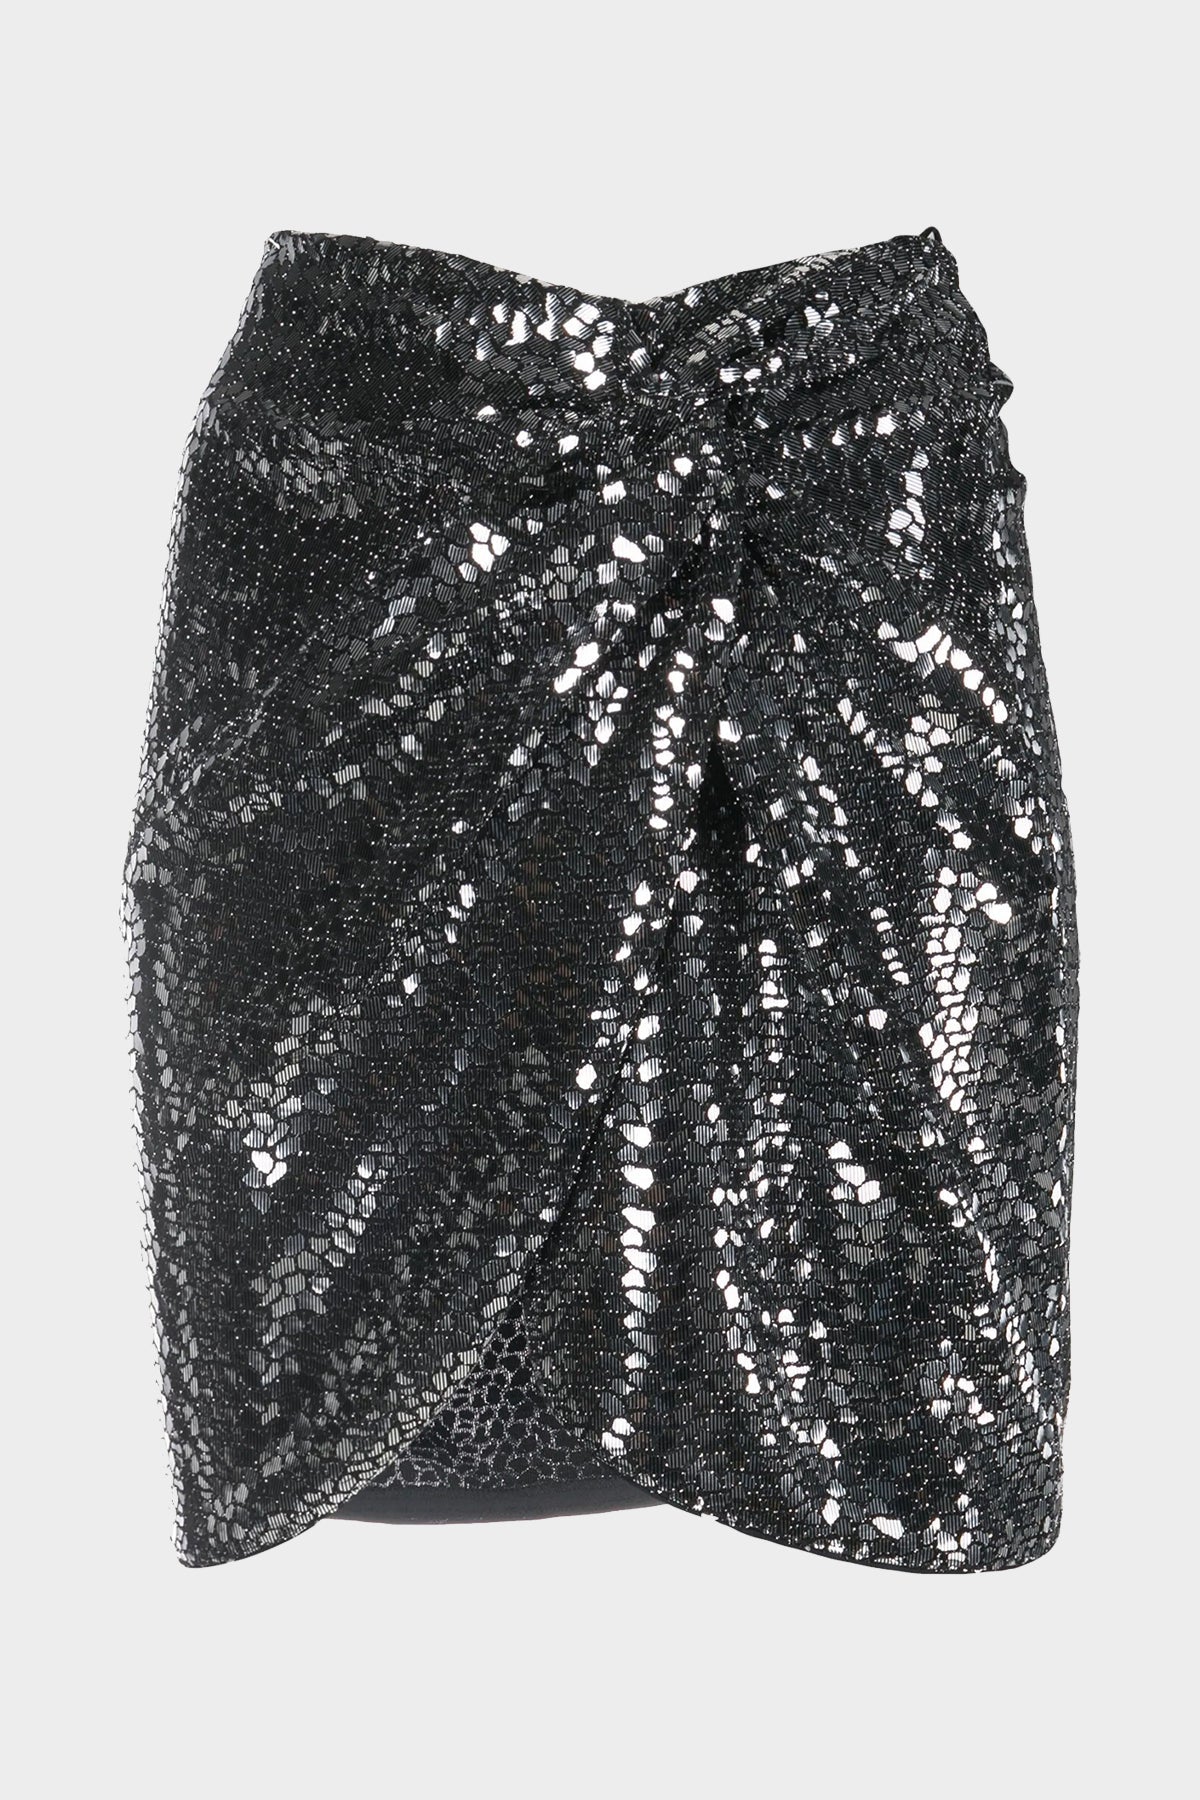 "Night Glow" Knotted Mini Skirt in Silver Glow - shop-olivia.com